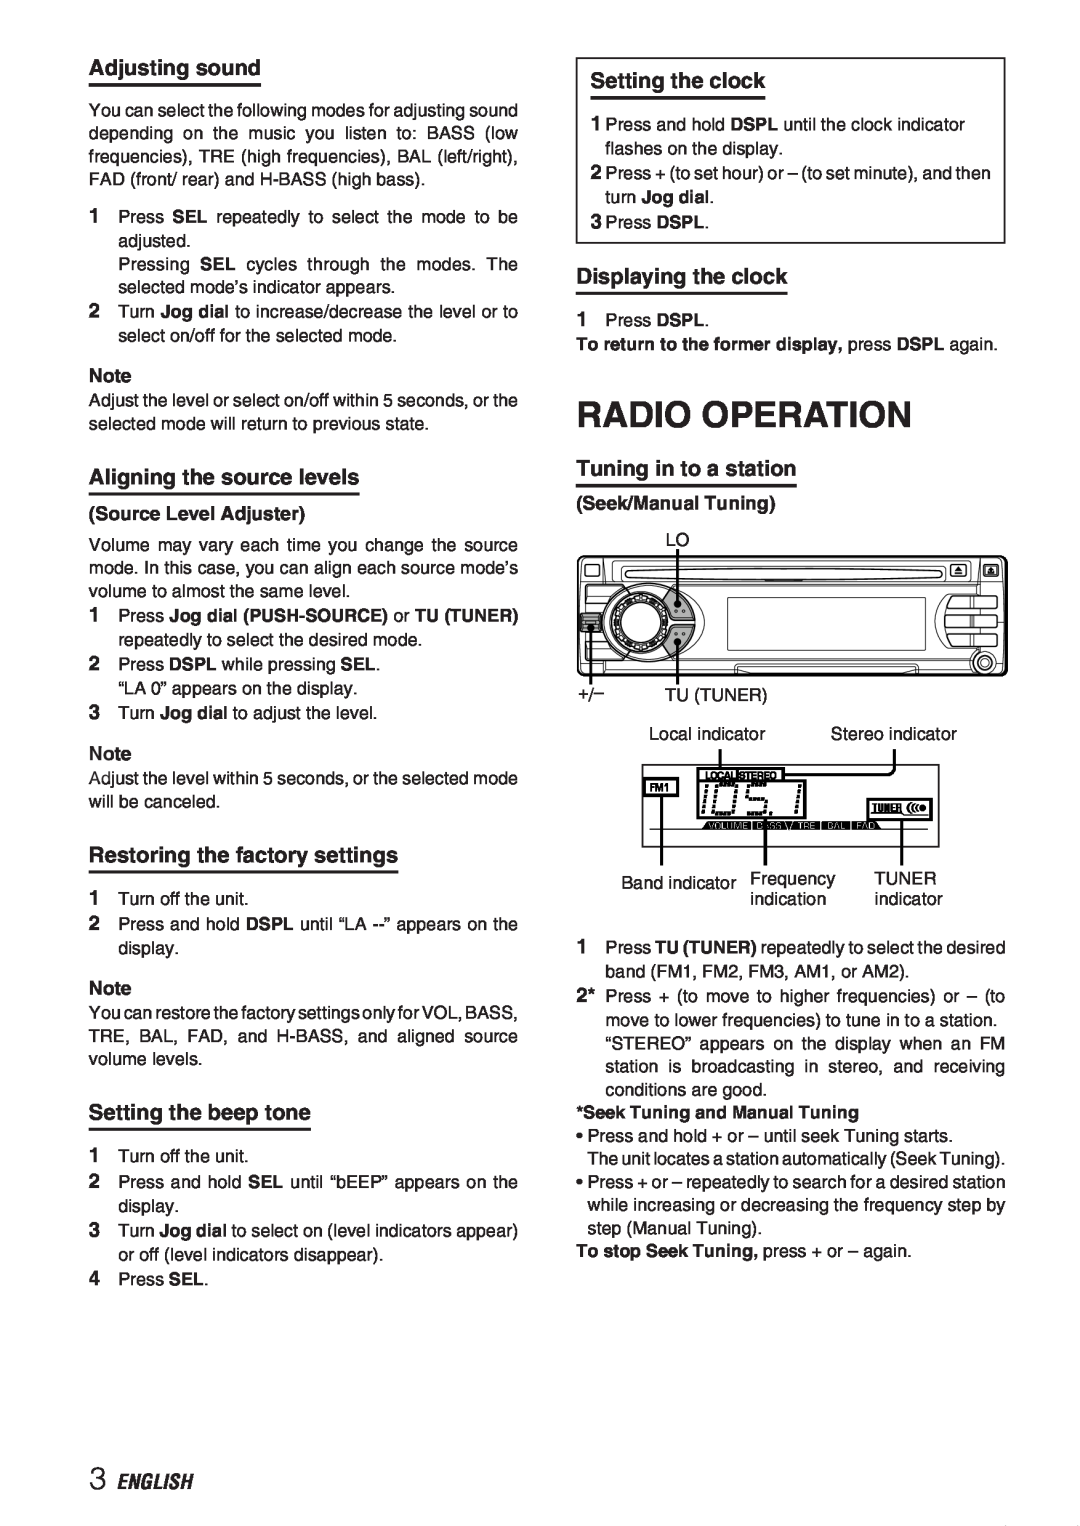 Aiwa CDC-X237 manual Radio Operation, Adjusting sound, Aligning the source levels, Restoring the factory settings, English 